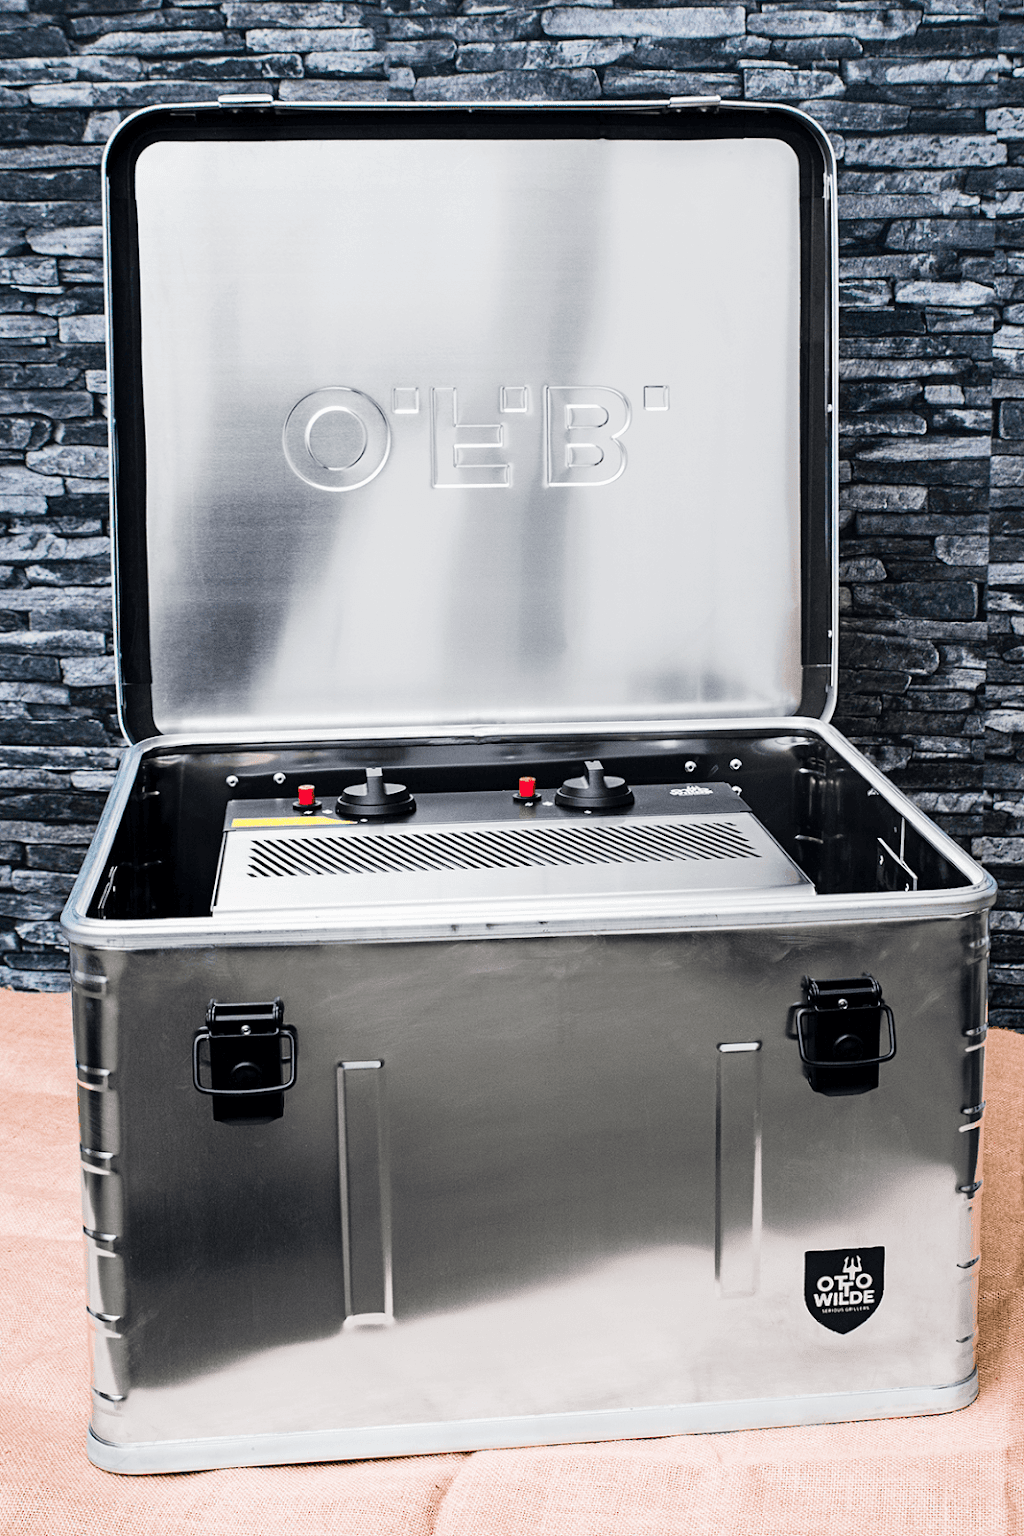 Otto Wilde Grillers Australia | store | 35 Shirley Way, Epping VIC 3076, Australia | 0384013288 OR +61 3 8401 3288